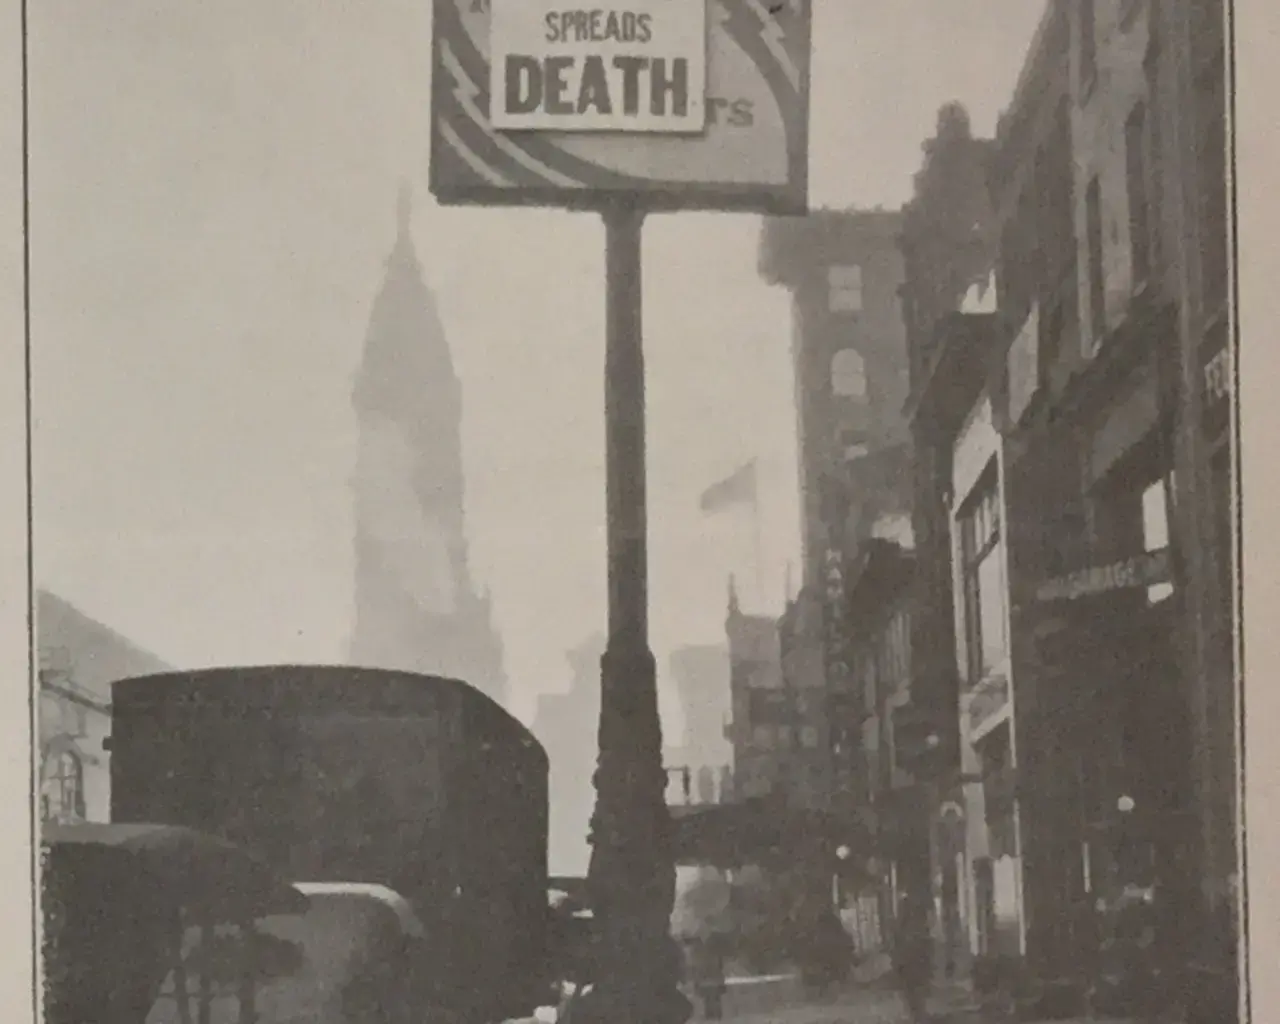 "Spit Spreads Death: The Influenza Pandemic of 1918-19 in Philadephia," Spit Spreads Death&nbsp;sign, 1918, Collection of Temple University Libraries. Photo courtesy of The College of Physicians/Mütter Museum.